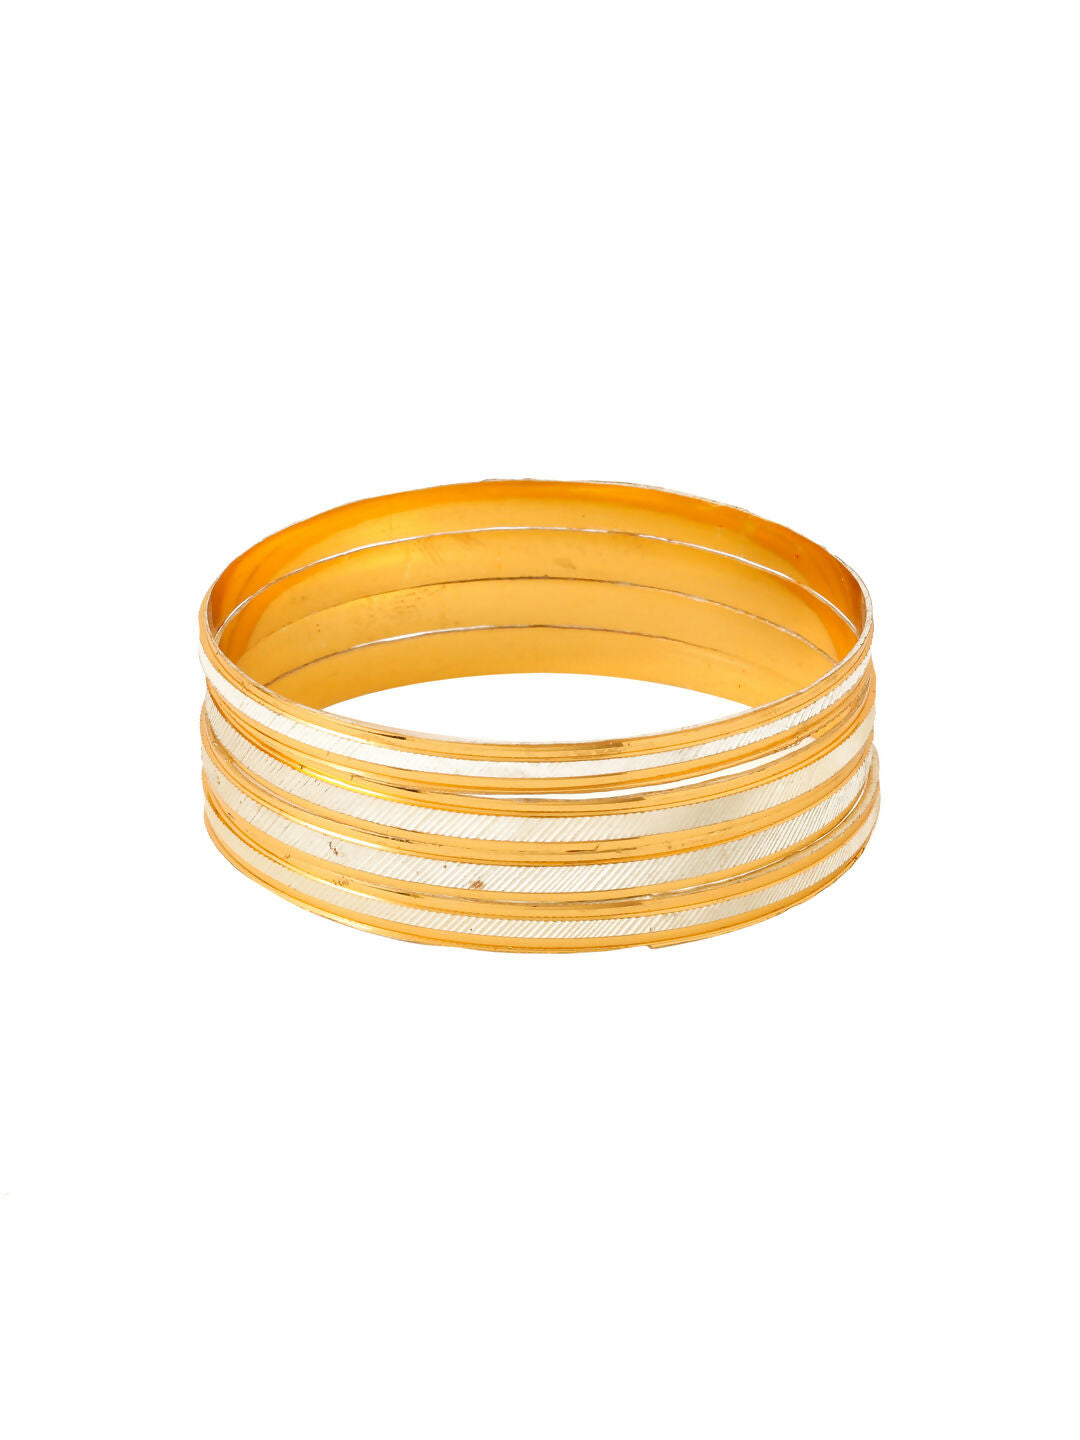 NVR Women's Set of 4 Gold-Plated Traditional Bangles - Distacart